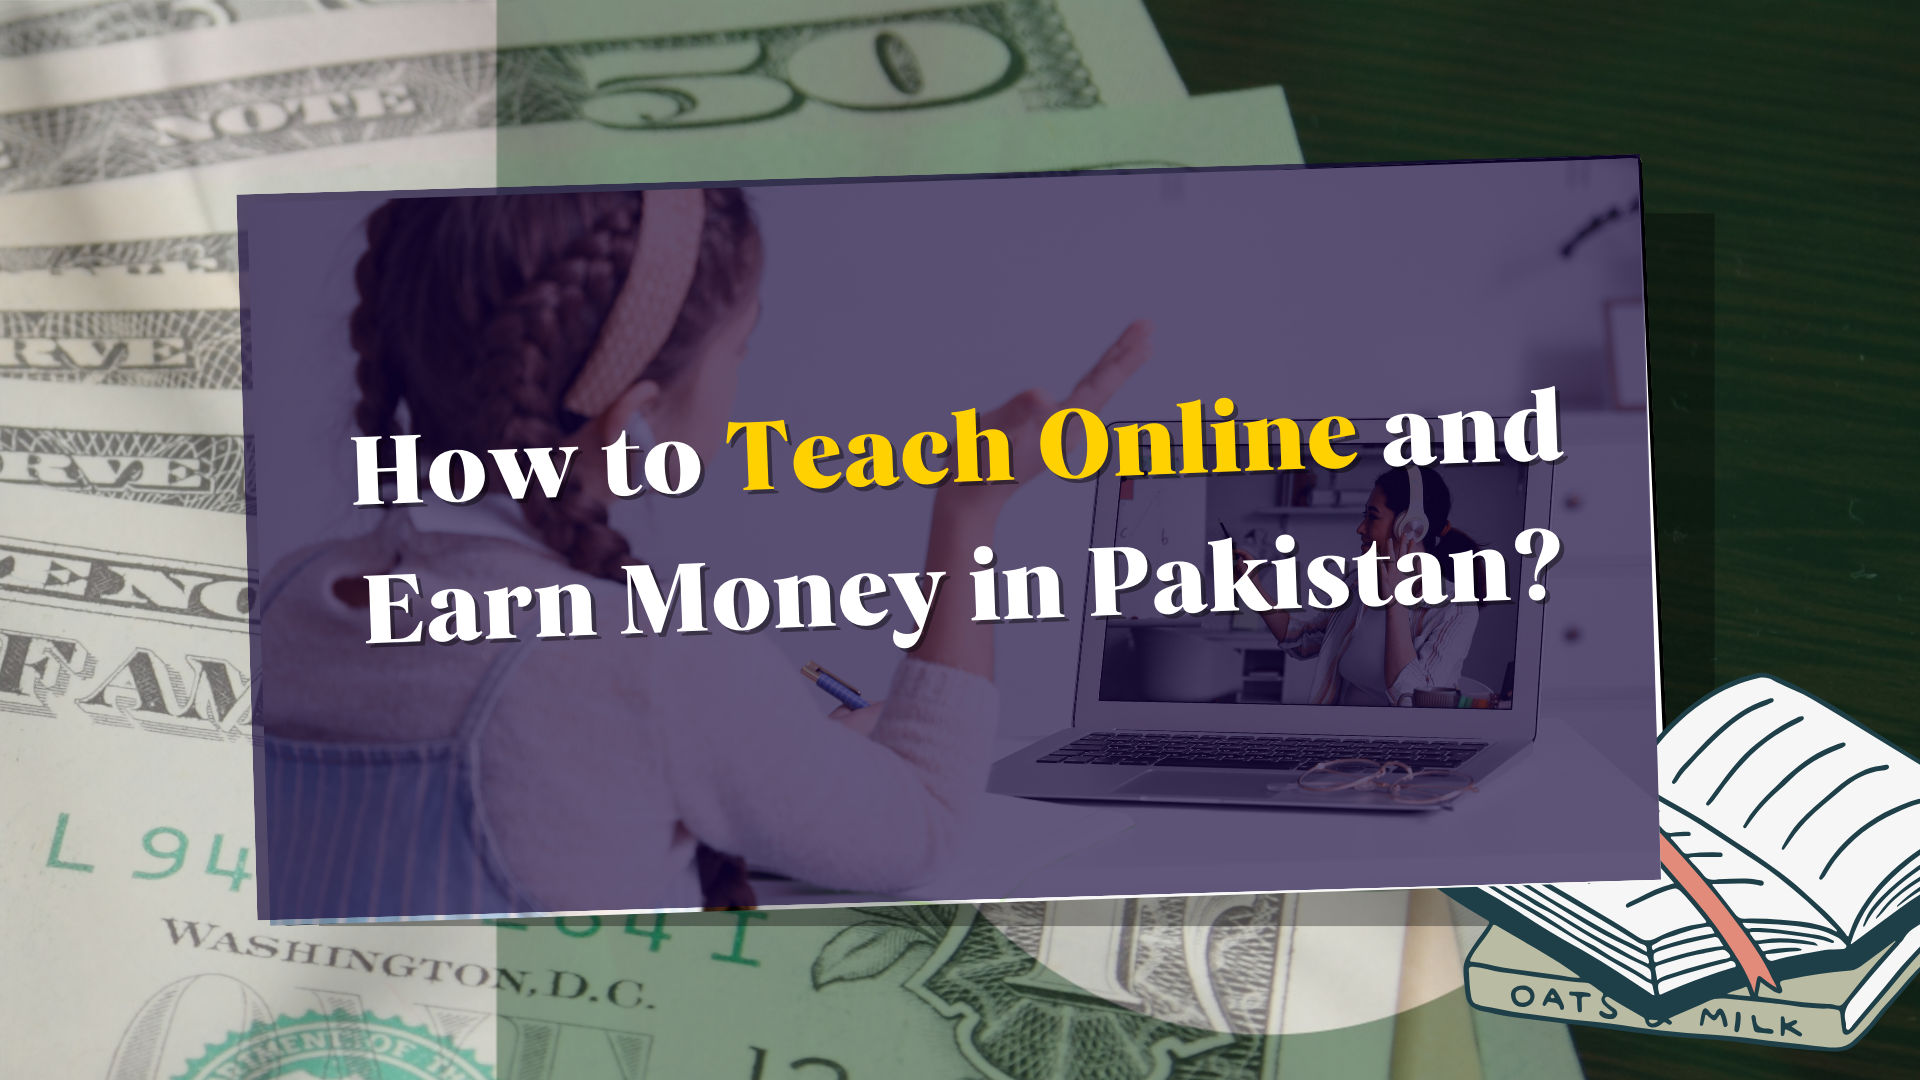 How to Teach Online and Earn Money in Pakistan?